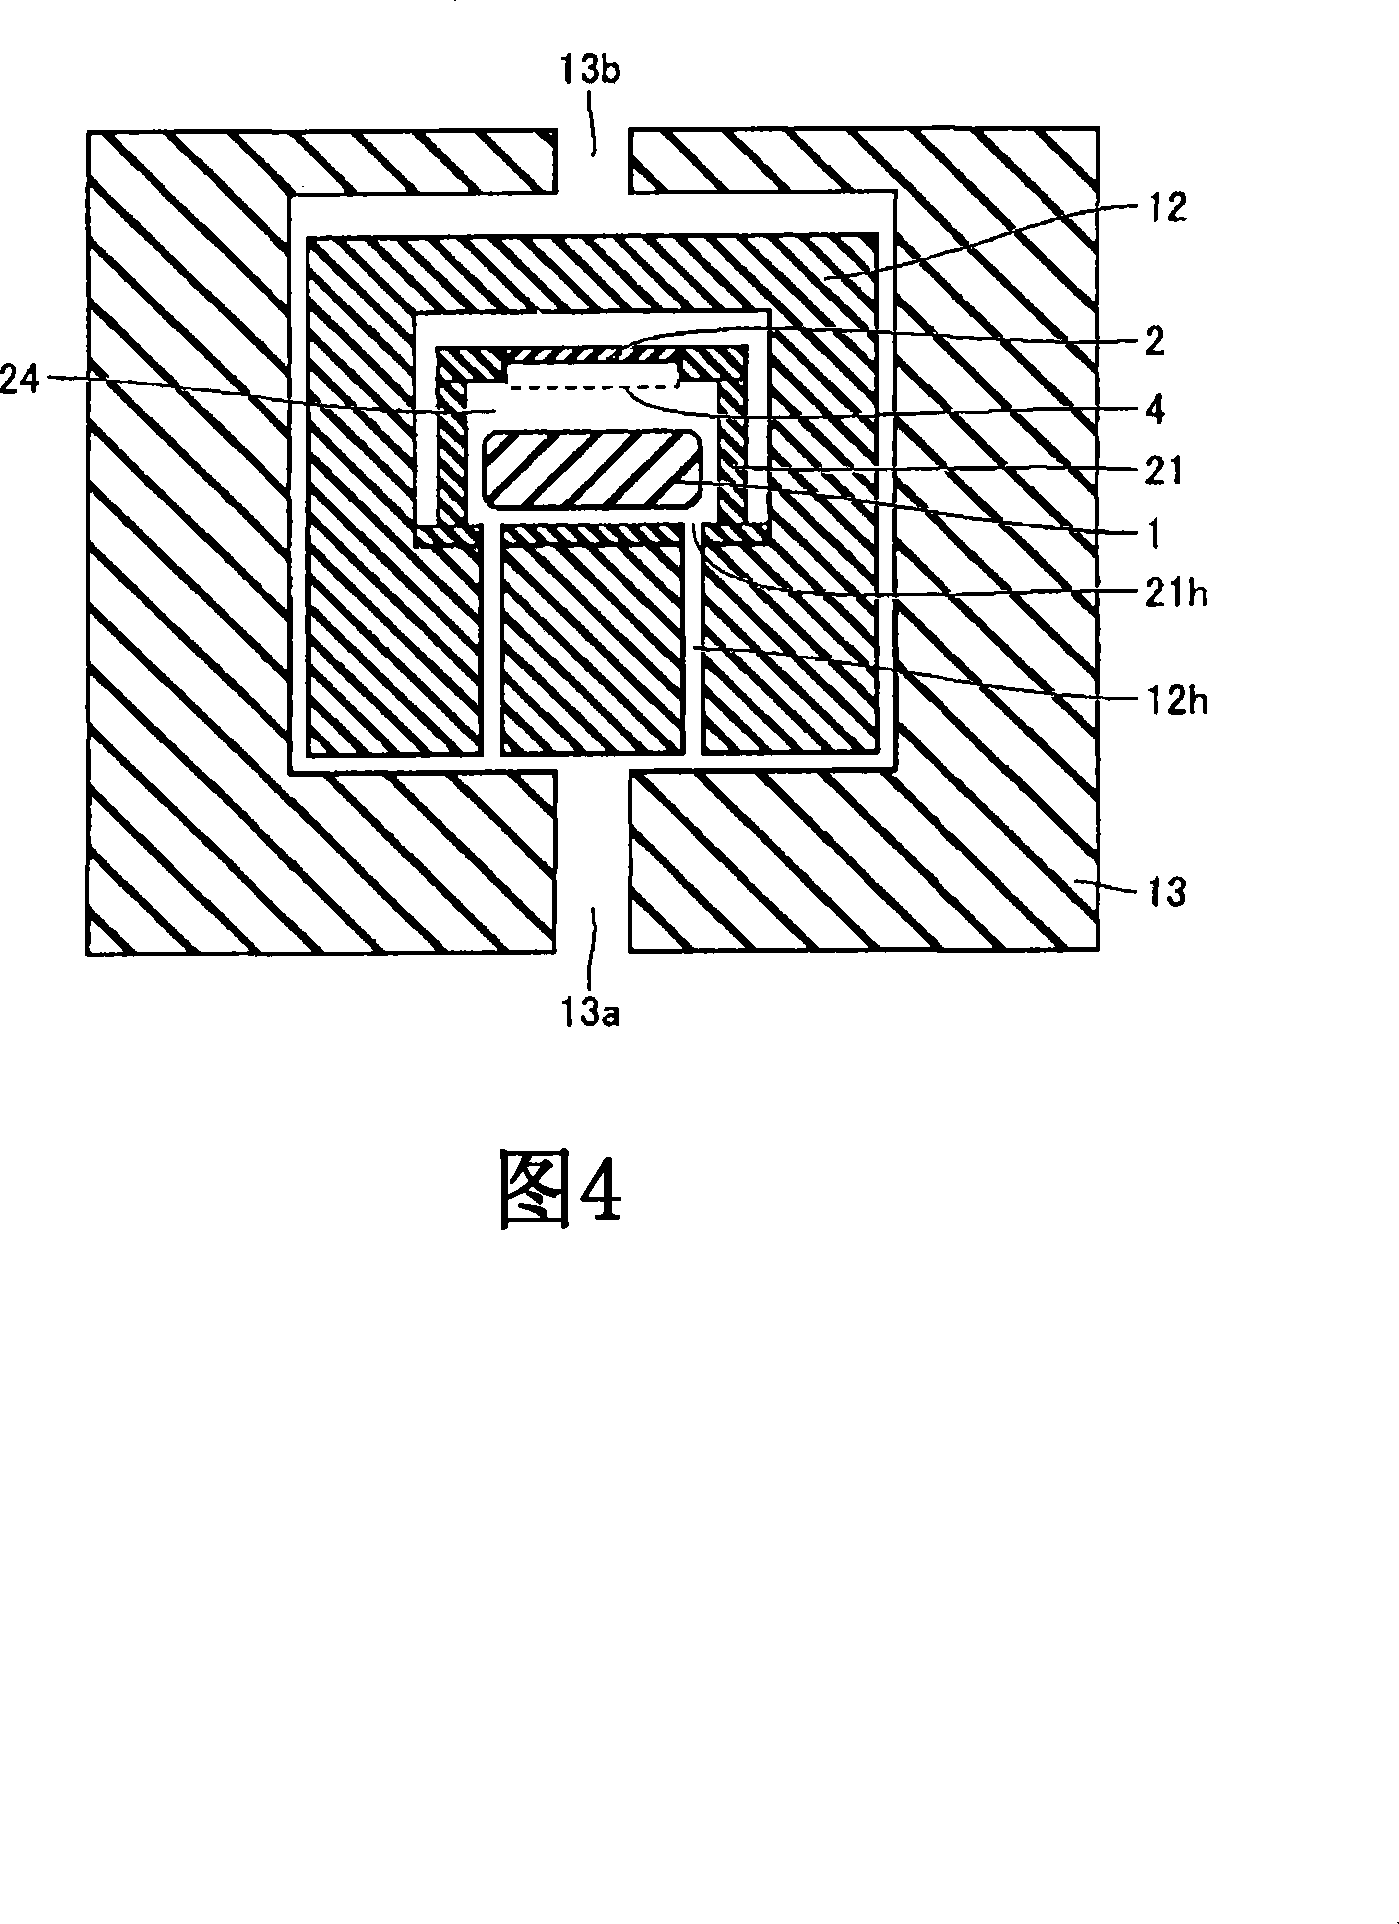 AIN crystal and method for growing the same, and AIN crystal substrate